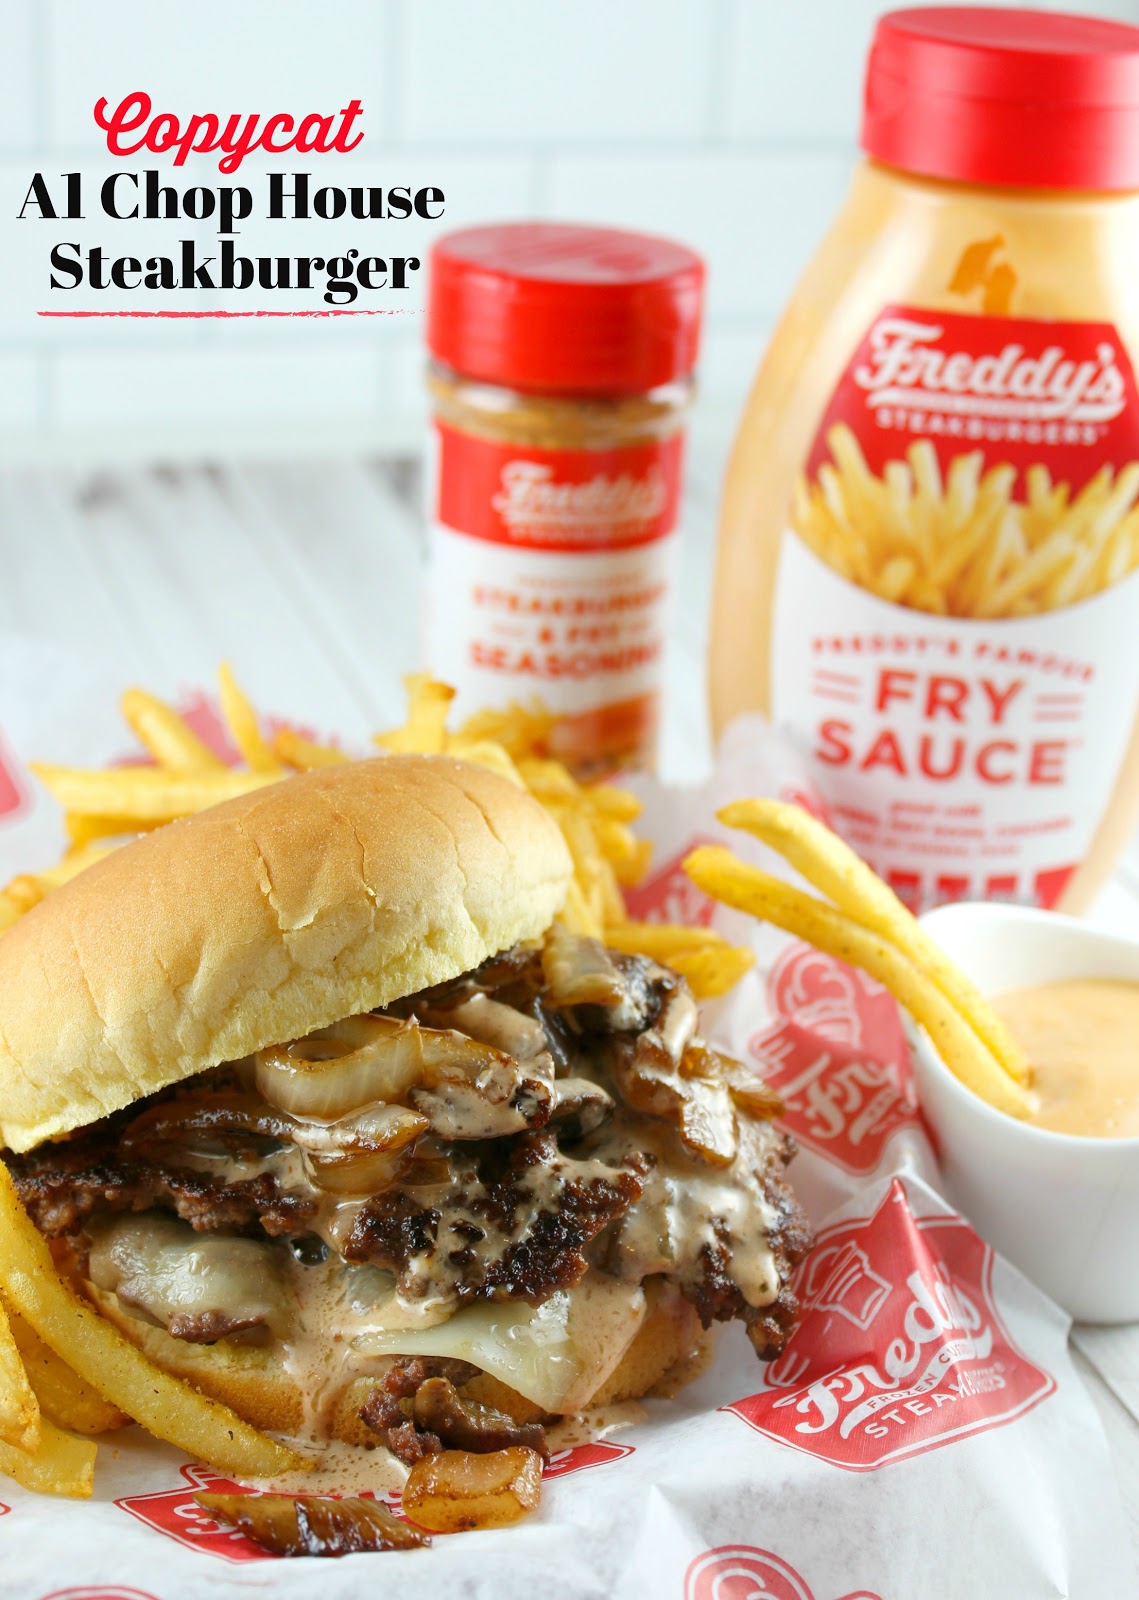 Copycat Freddy's A1 Chop House Steakburger Recipe - got the burger recipe and technique for those yummy crispy edges straight from the restaurant. This burger is AMAZING!! Two beef patties, white cheddar, grilled onions and the secret A1 Chop House Burger Sauce. I've got the whole recipe! You don't want to miss this burger!! #burger #copycat